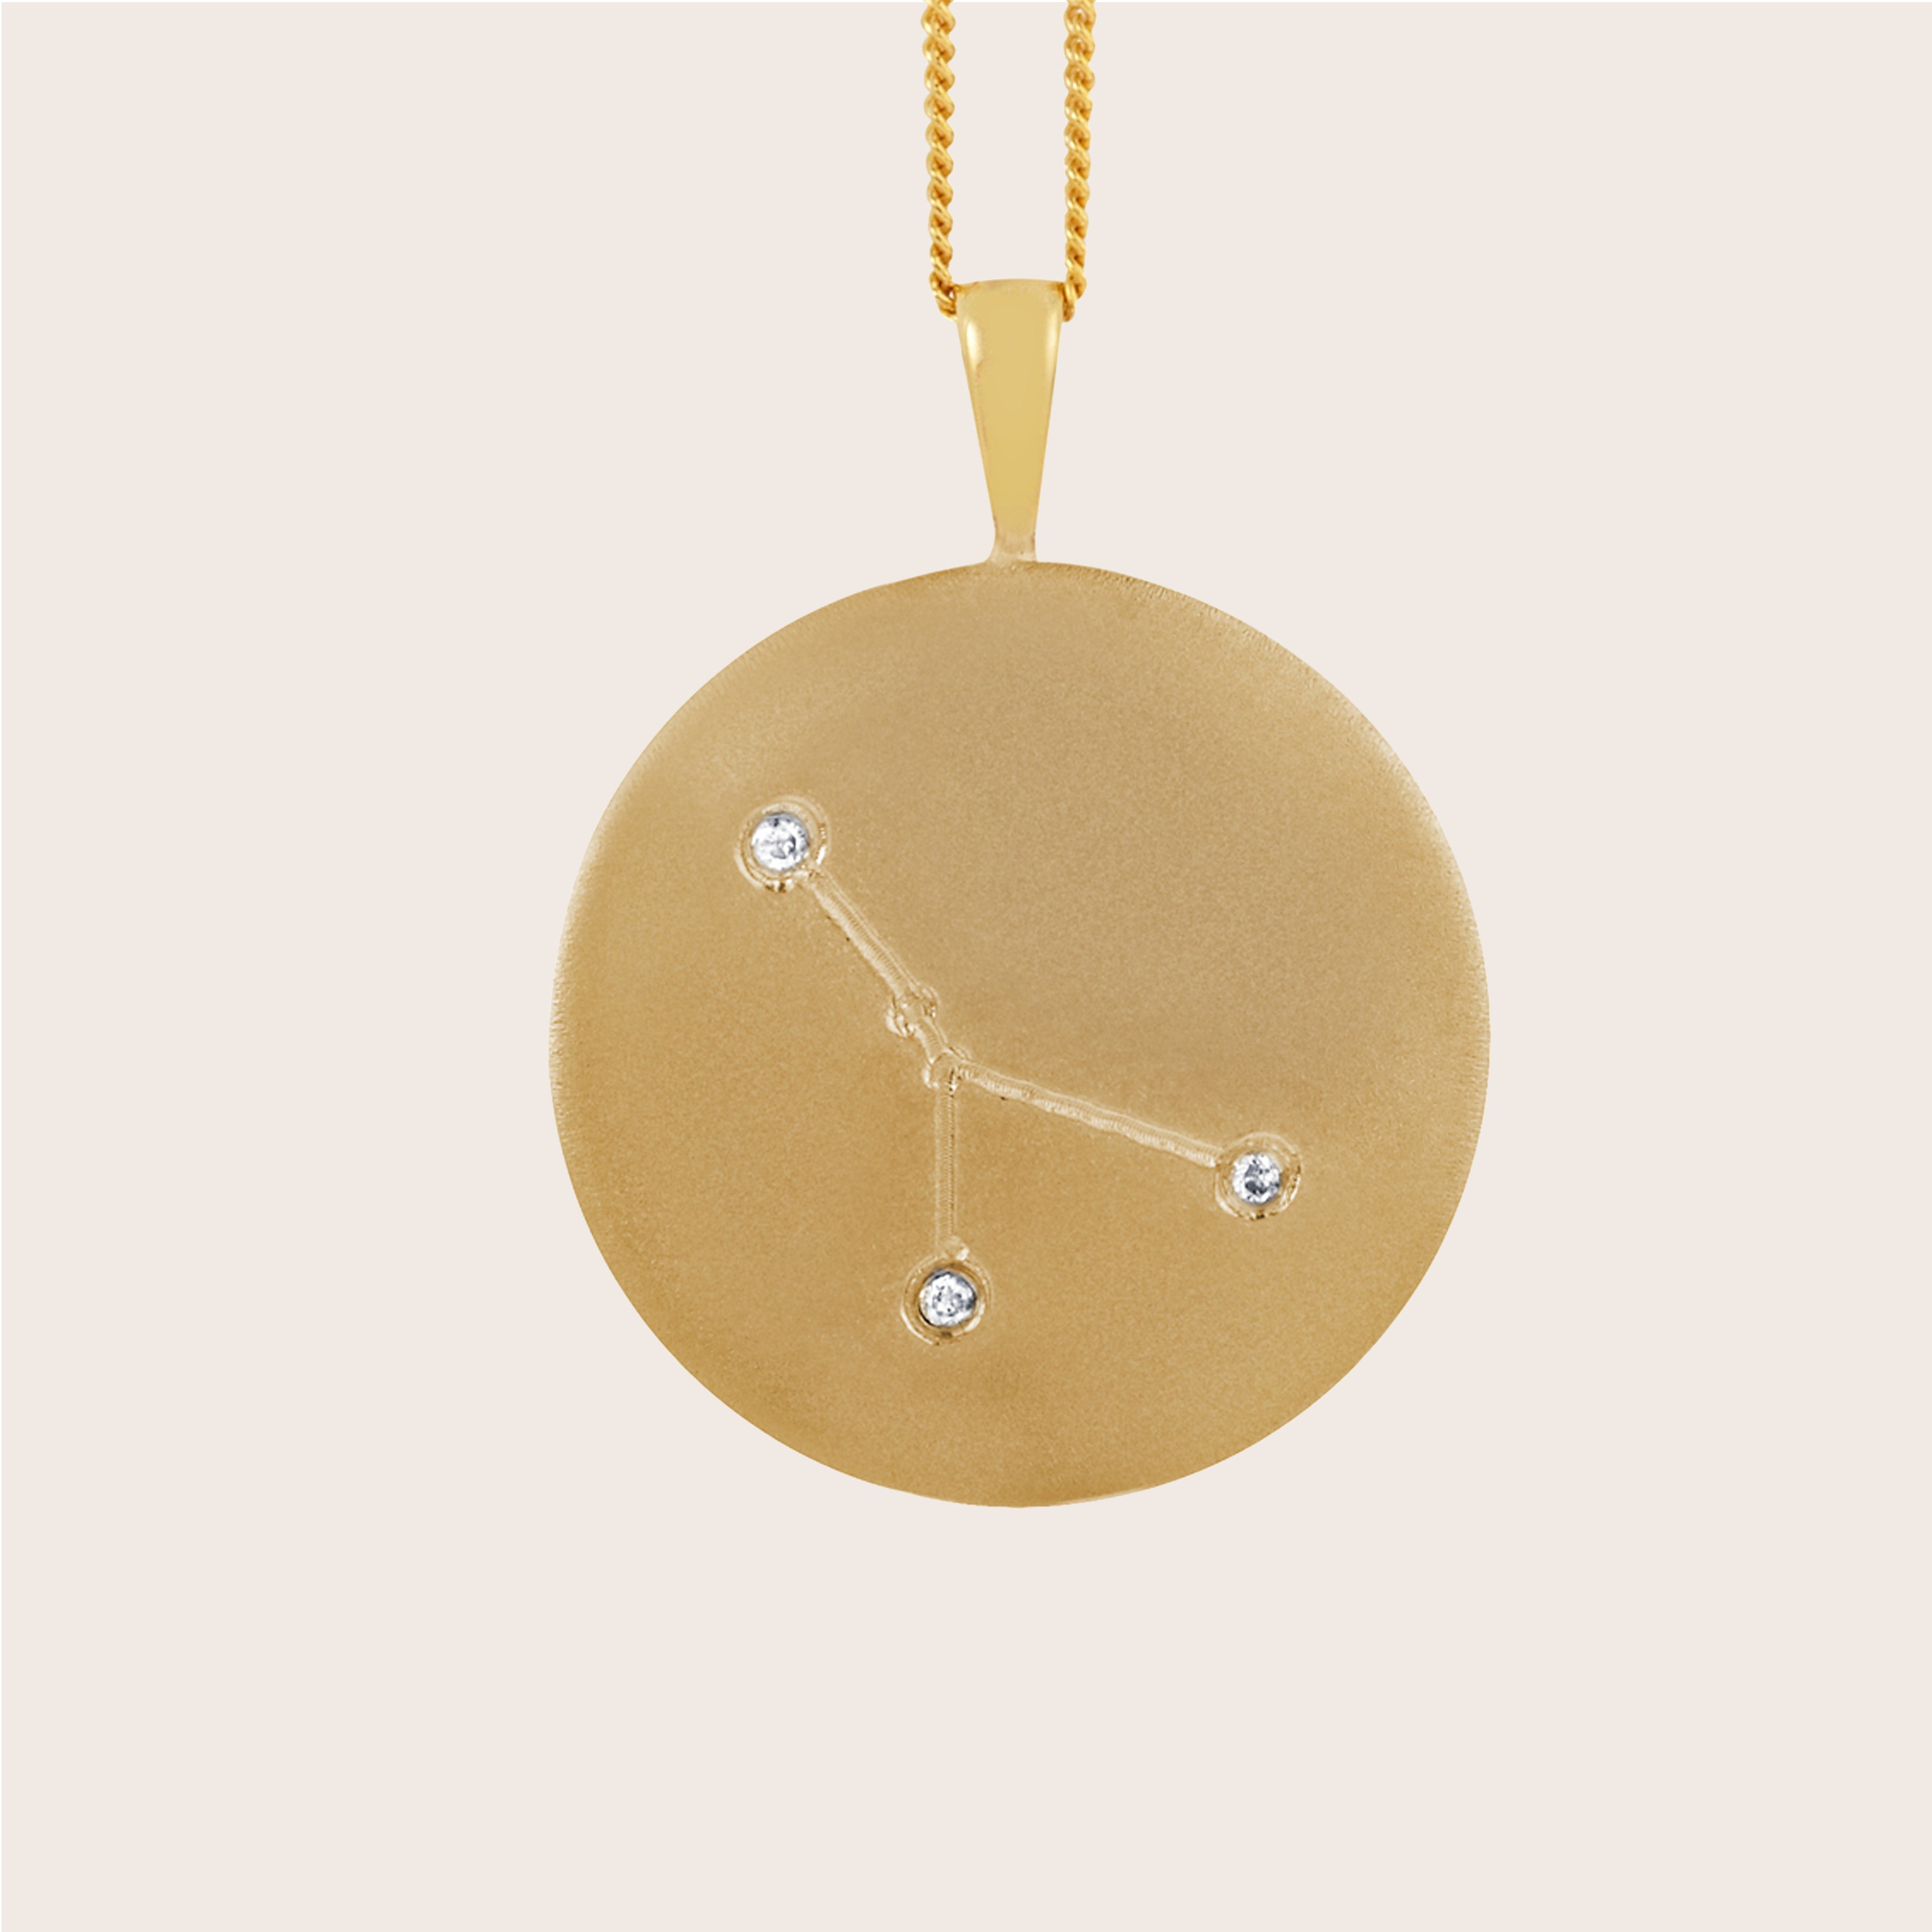 Cancer Constellation Diamond Necklace - Rock the Jumpsuit